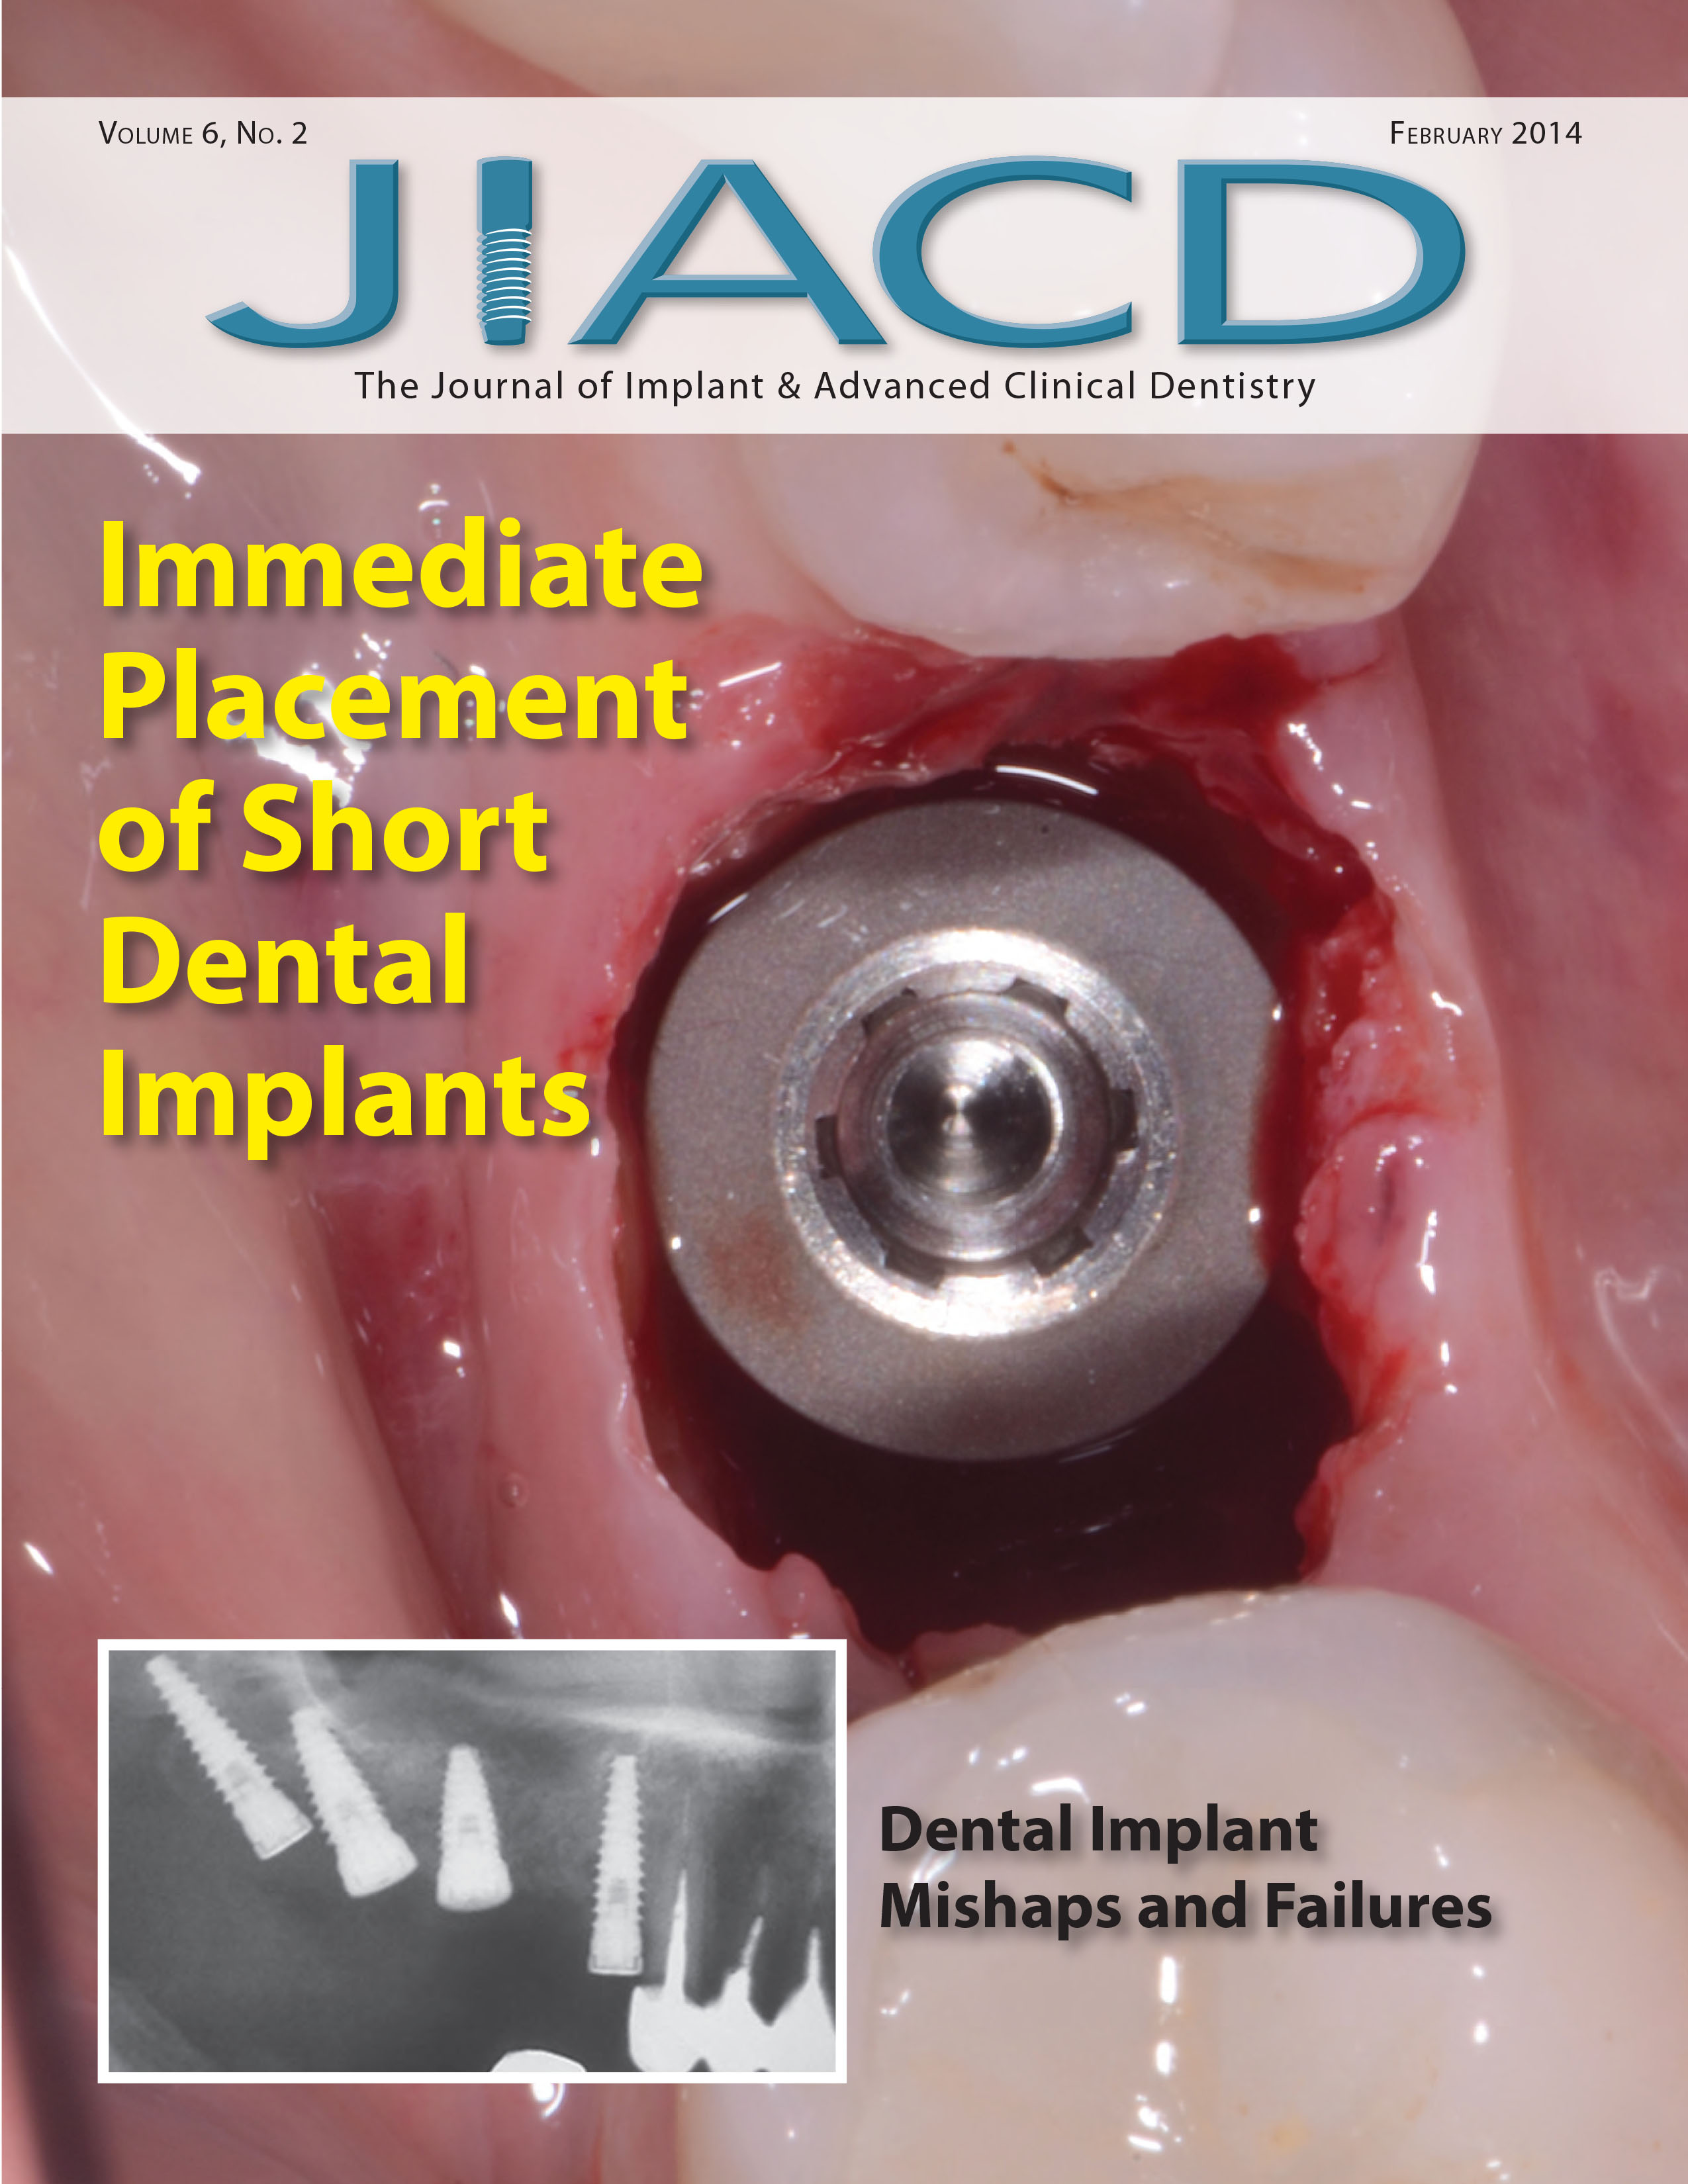 Immediate Placement of Short Dental Implants